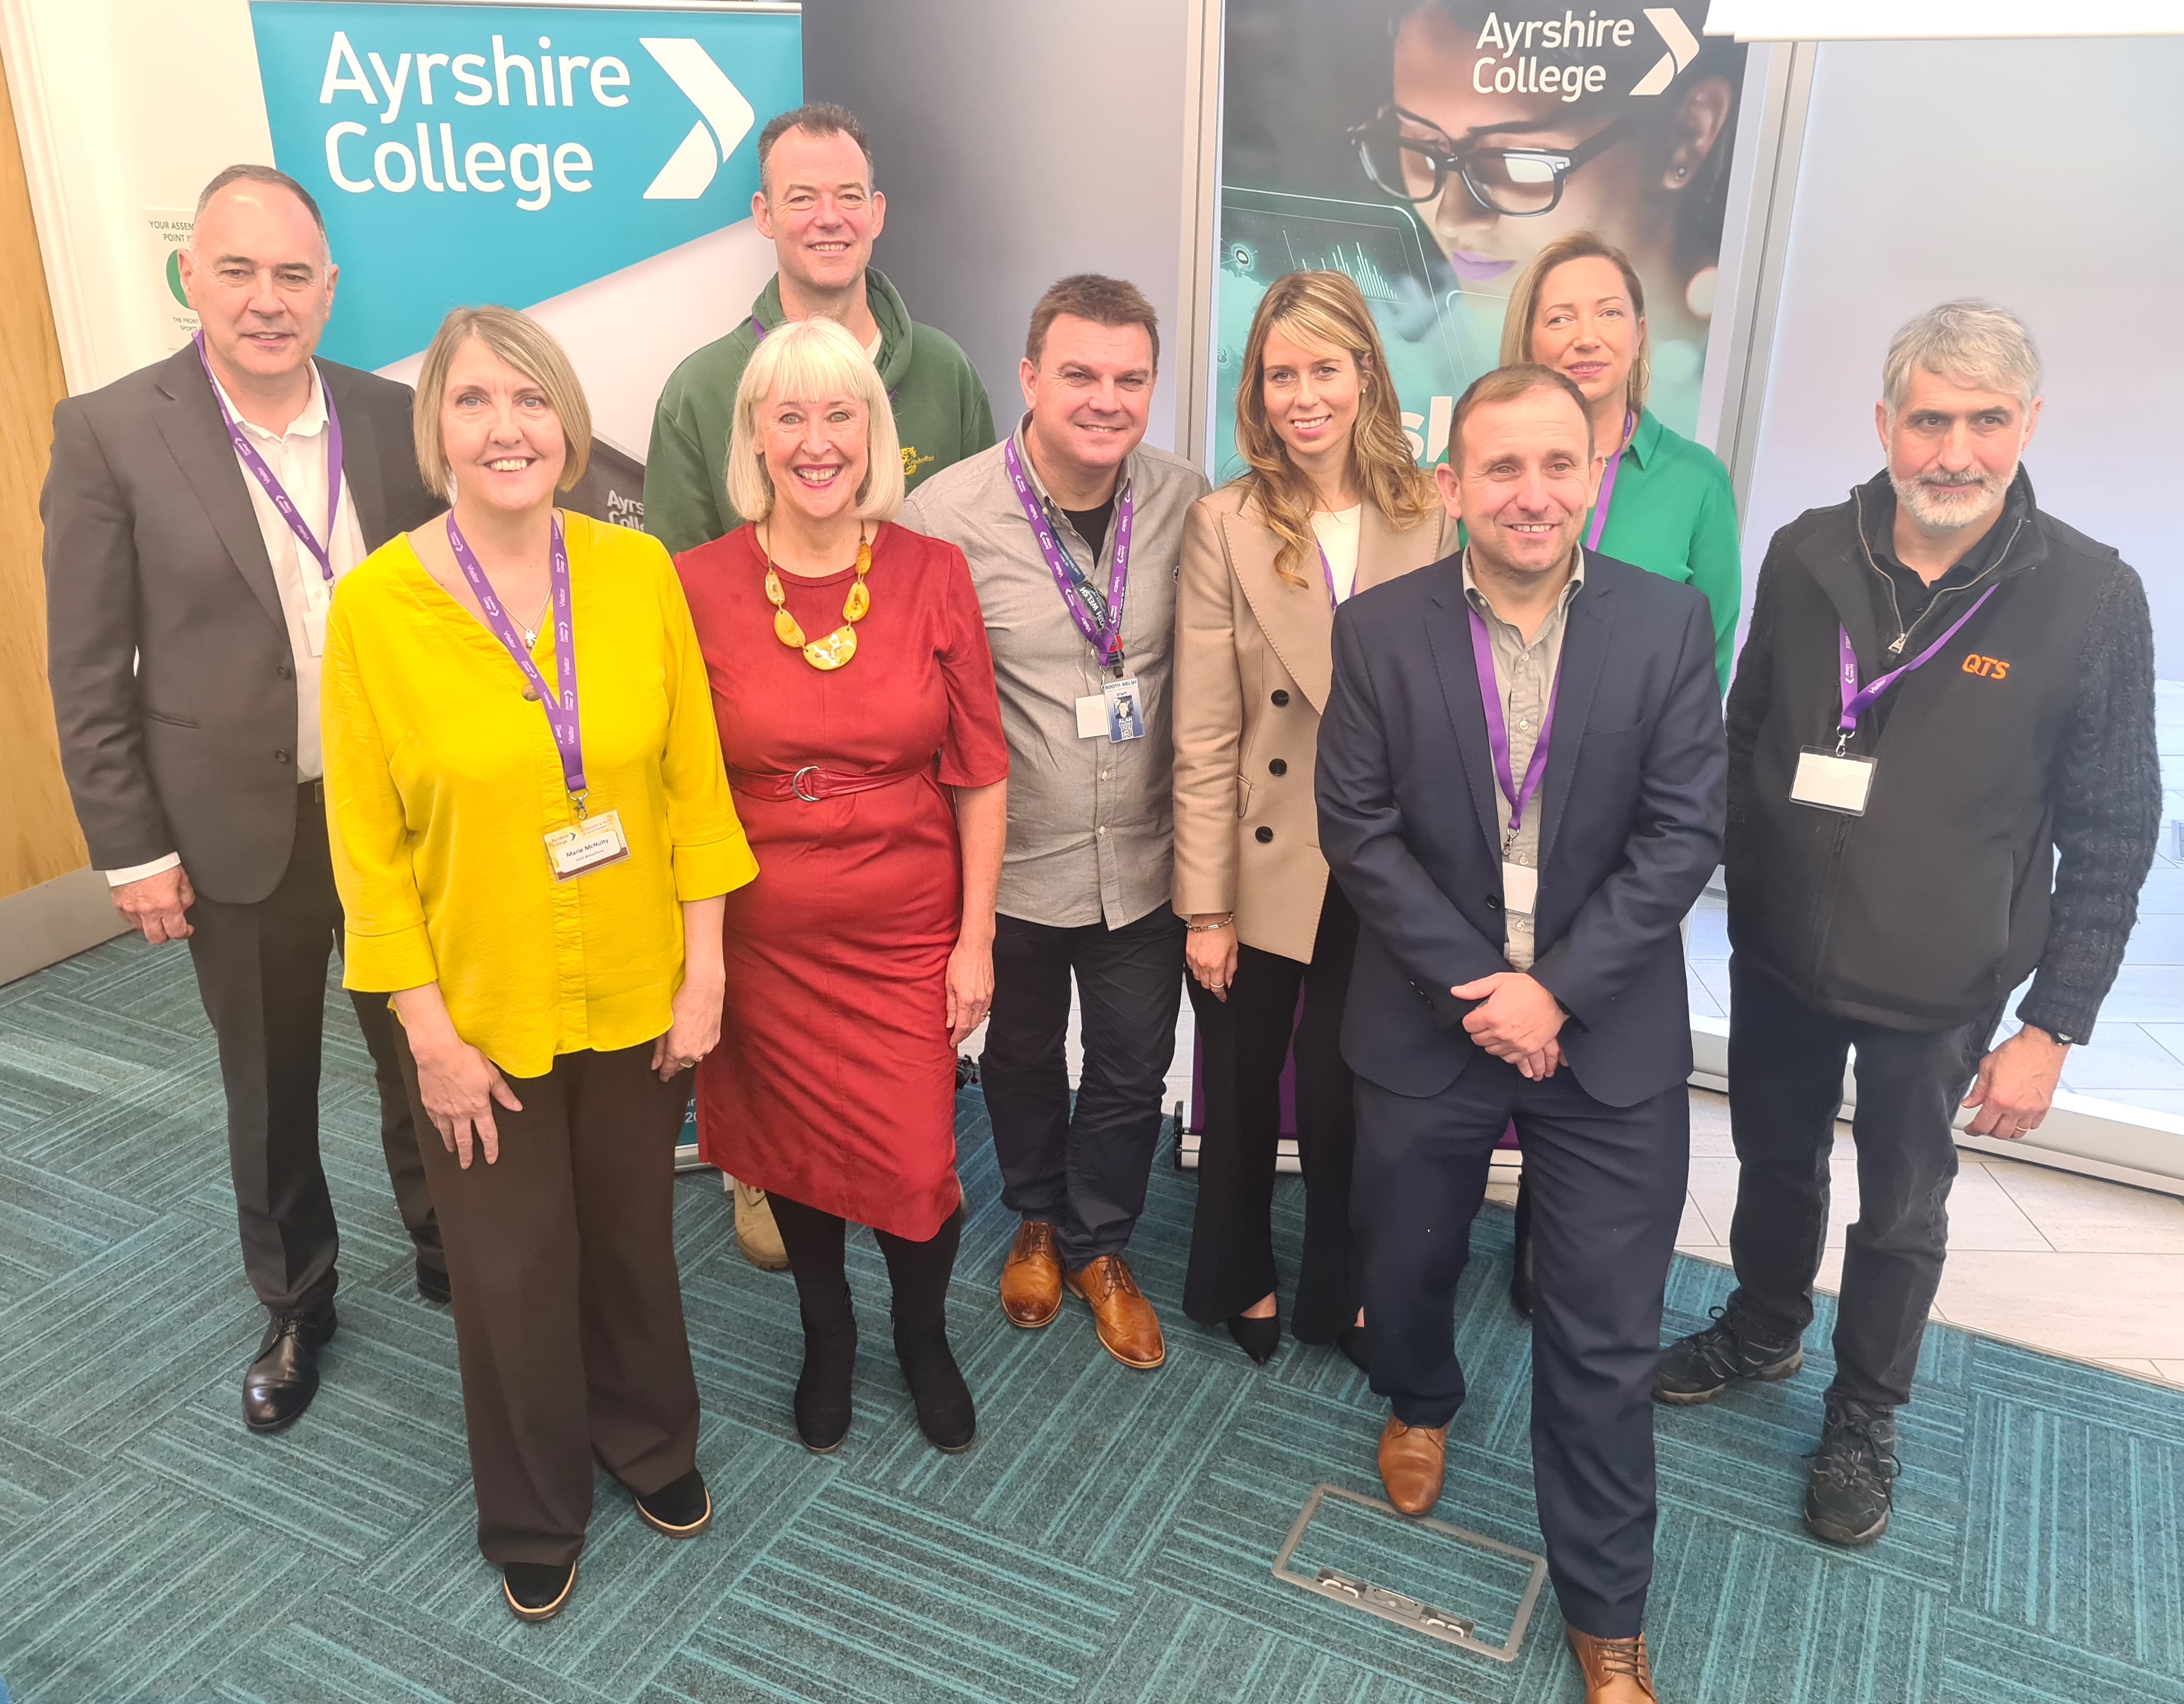 Ayrshire College hosts event looking ahead to a sustainable future